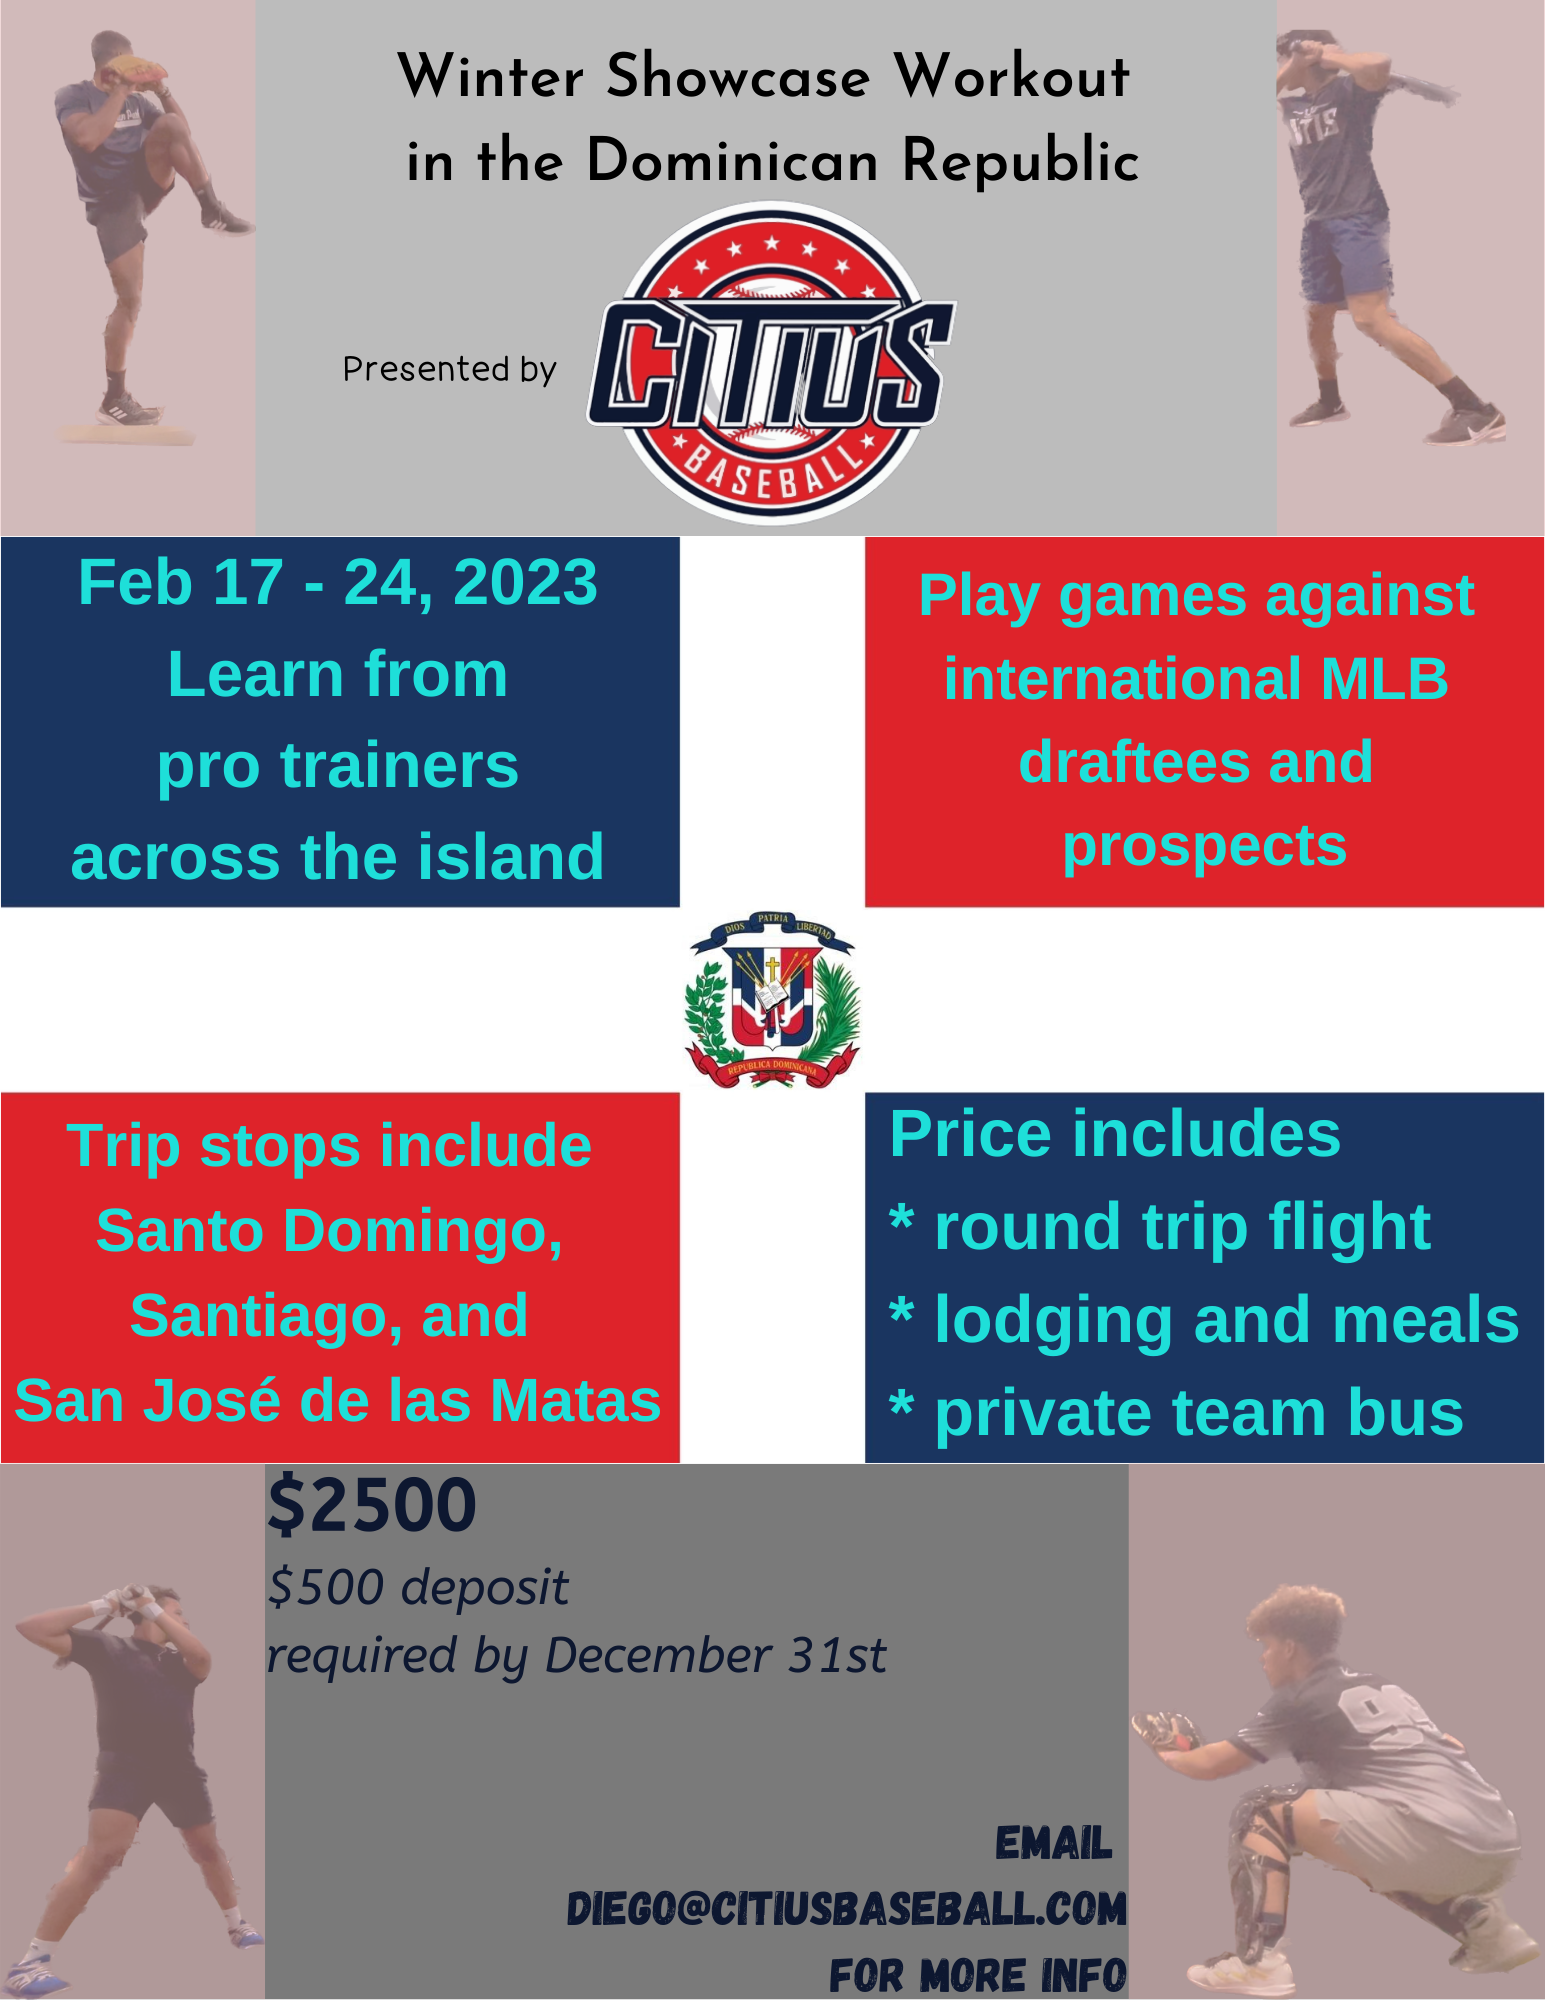 Winter Showcase Workout in the Dominican Republic, presented by Citius Baseball Academy